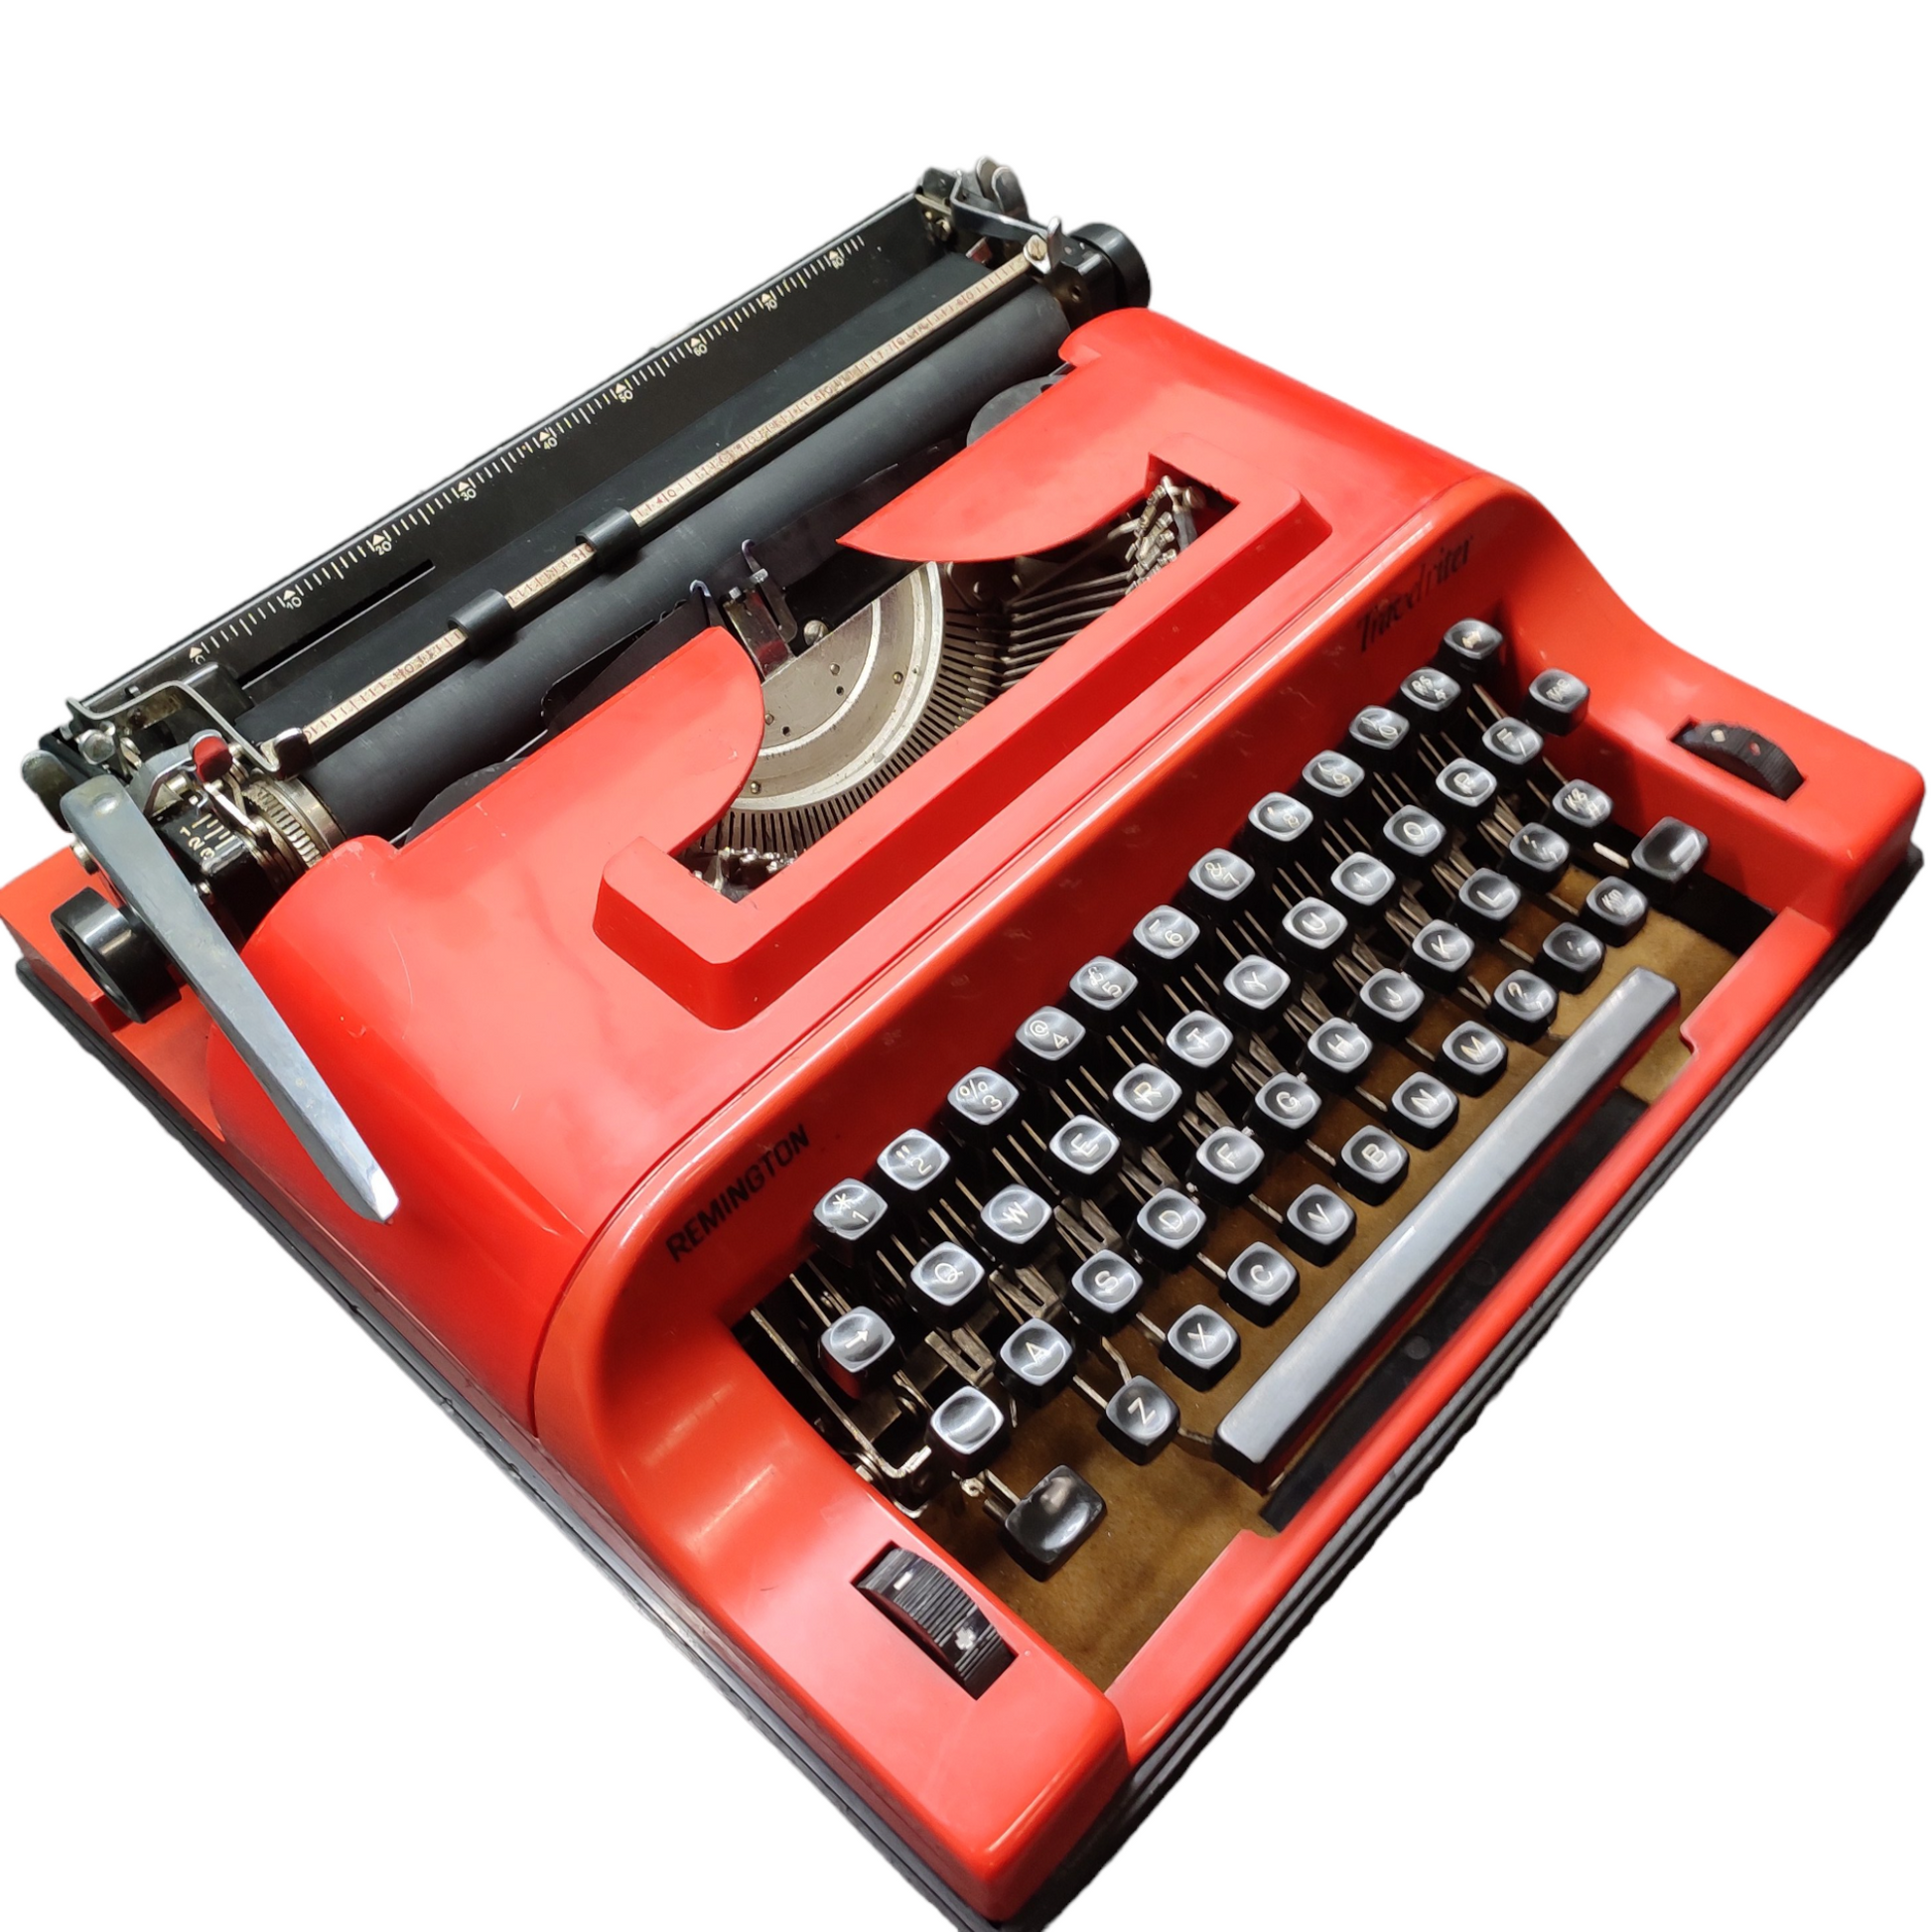 Image of Remington Travelriter Typewriter. Available from universaltypewritercompany.in